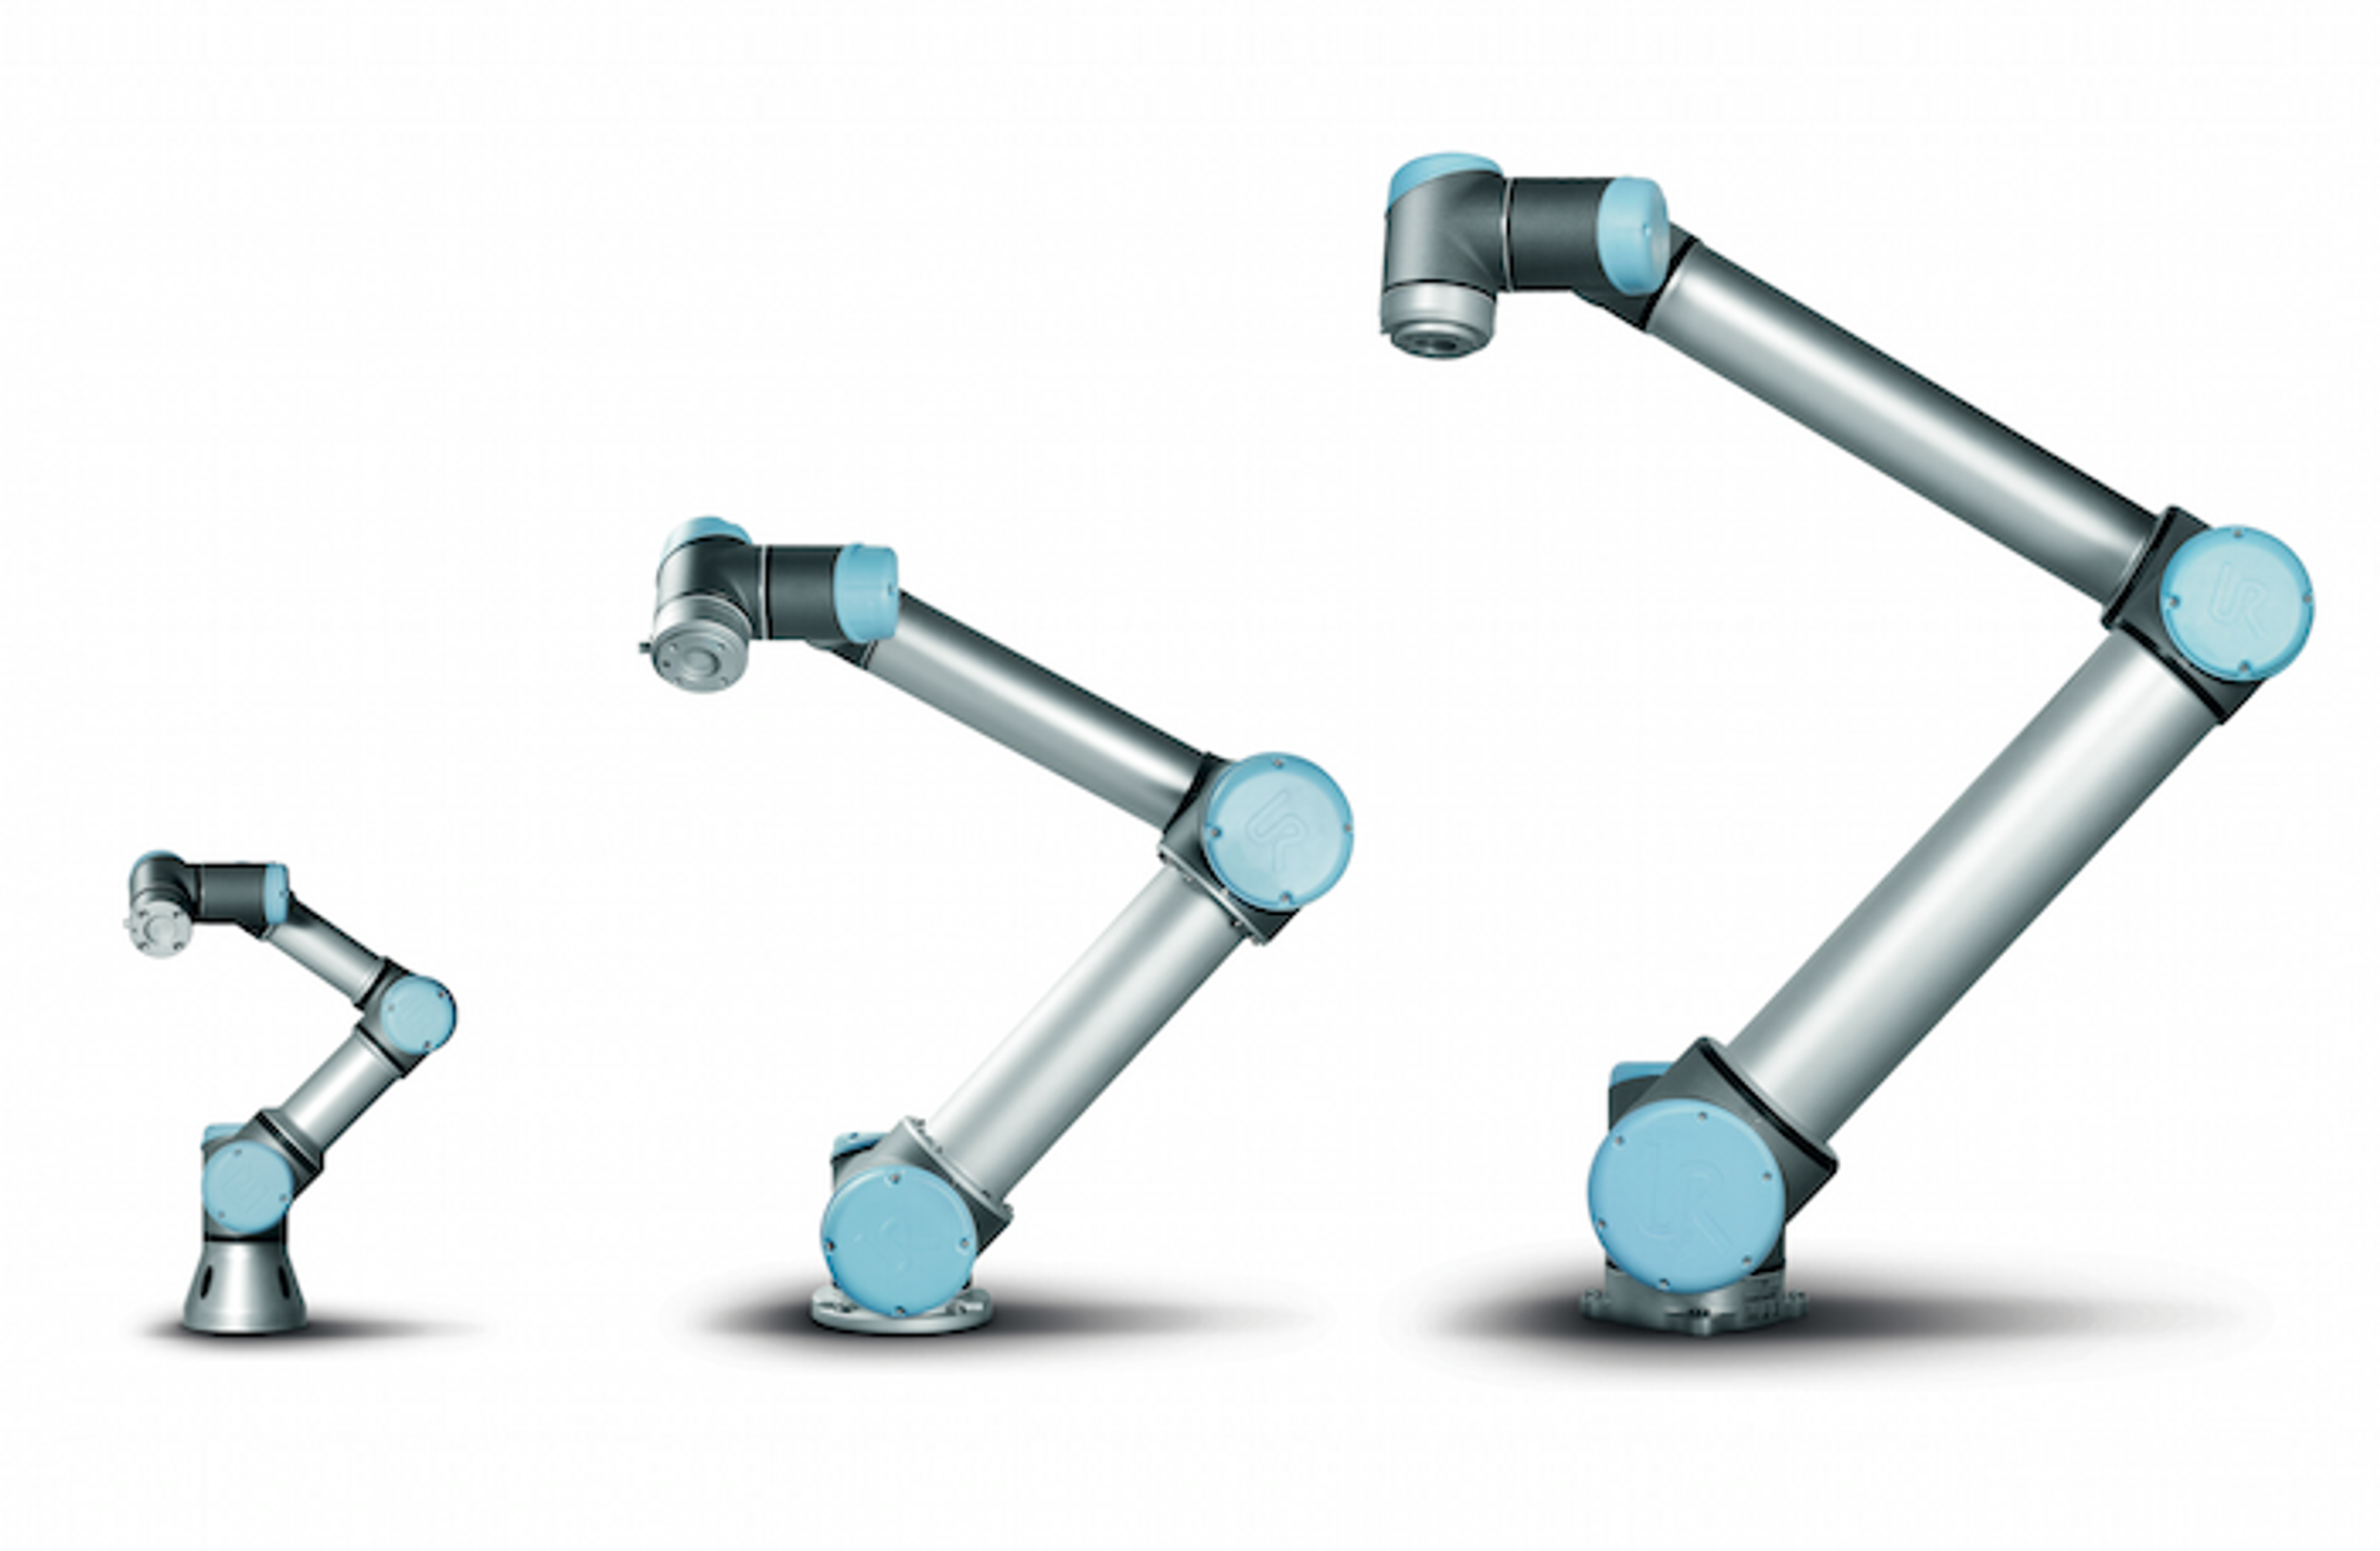 Universal Robots UR3 Arm Is Small and Nimble, Helps to Build Copies of Itself